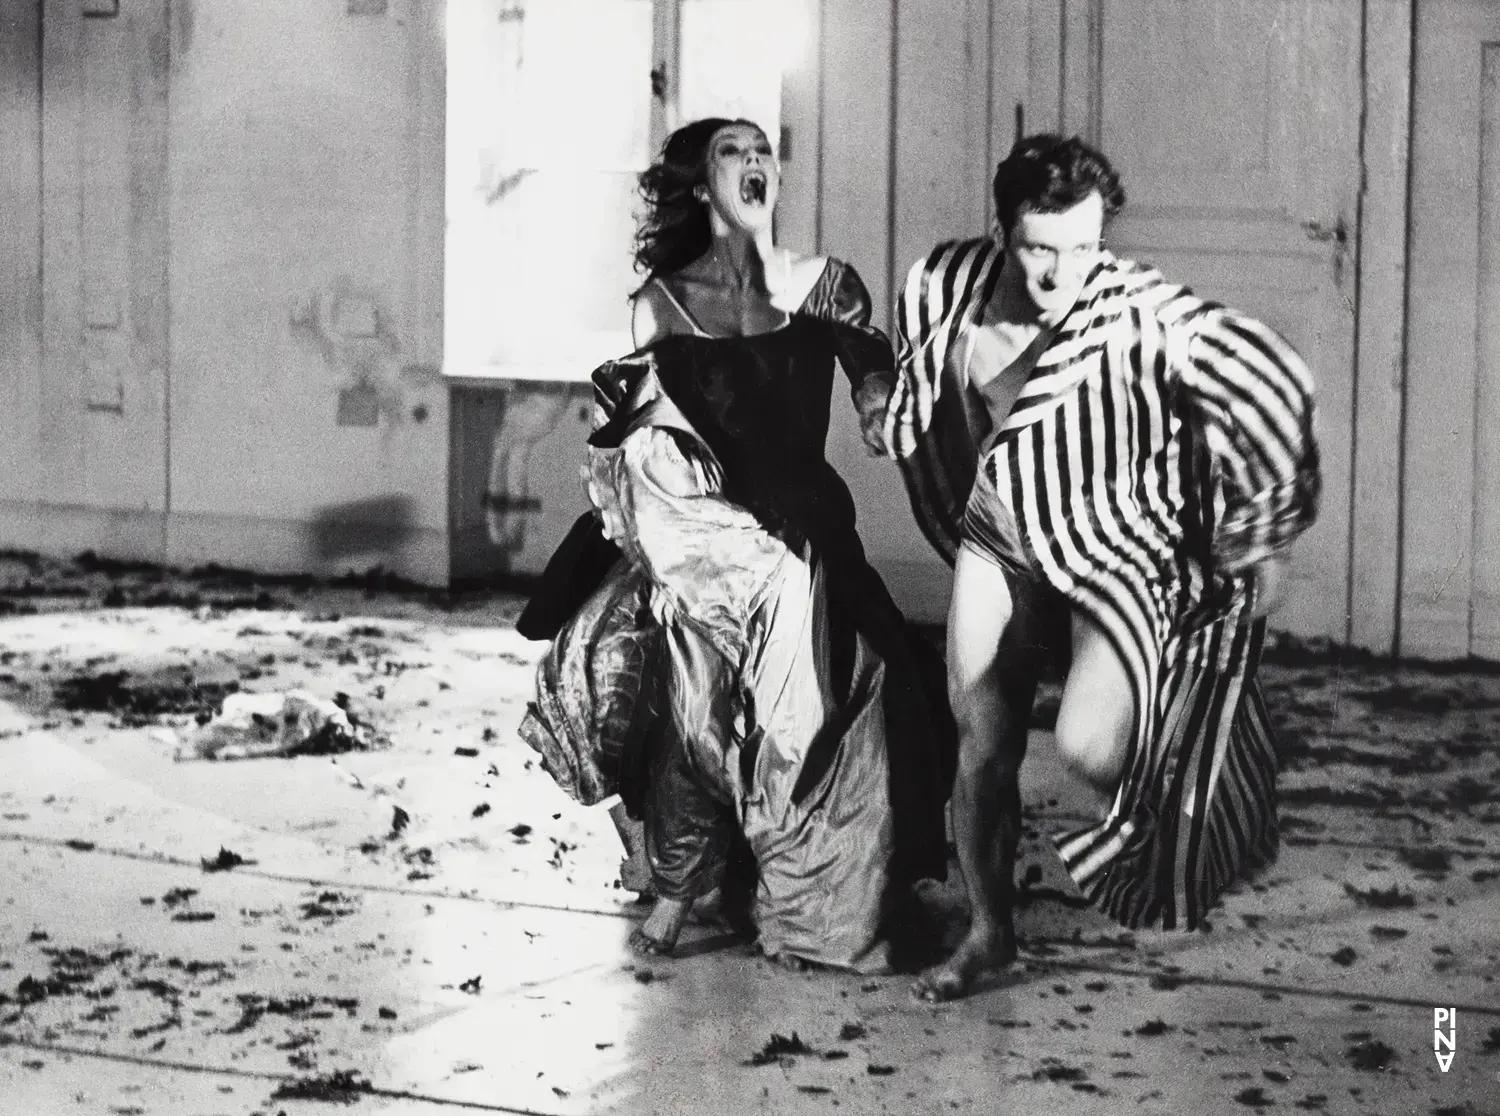 <p>Jan Minařík and Marion Cito in “Bluebeard. While Listening to a Tape Recording of Béla Bartók's Opera "Duke Bluebeard's Castle"” by Pina Bausch</p>